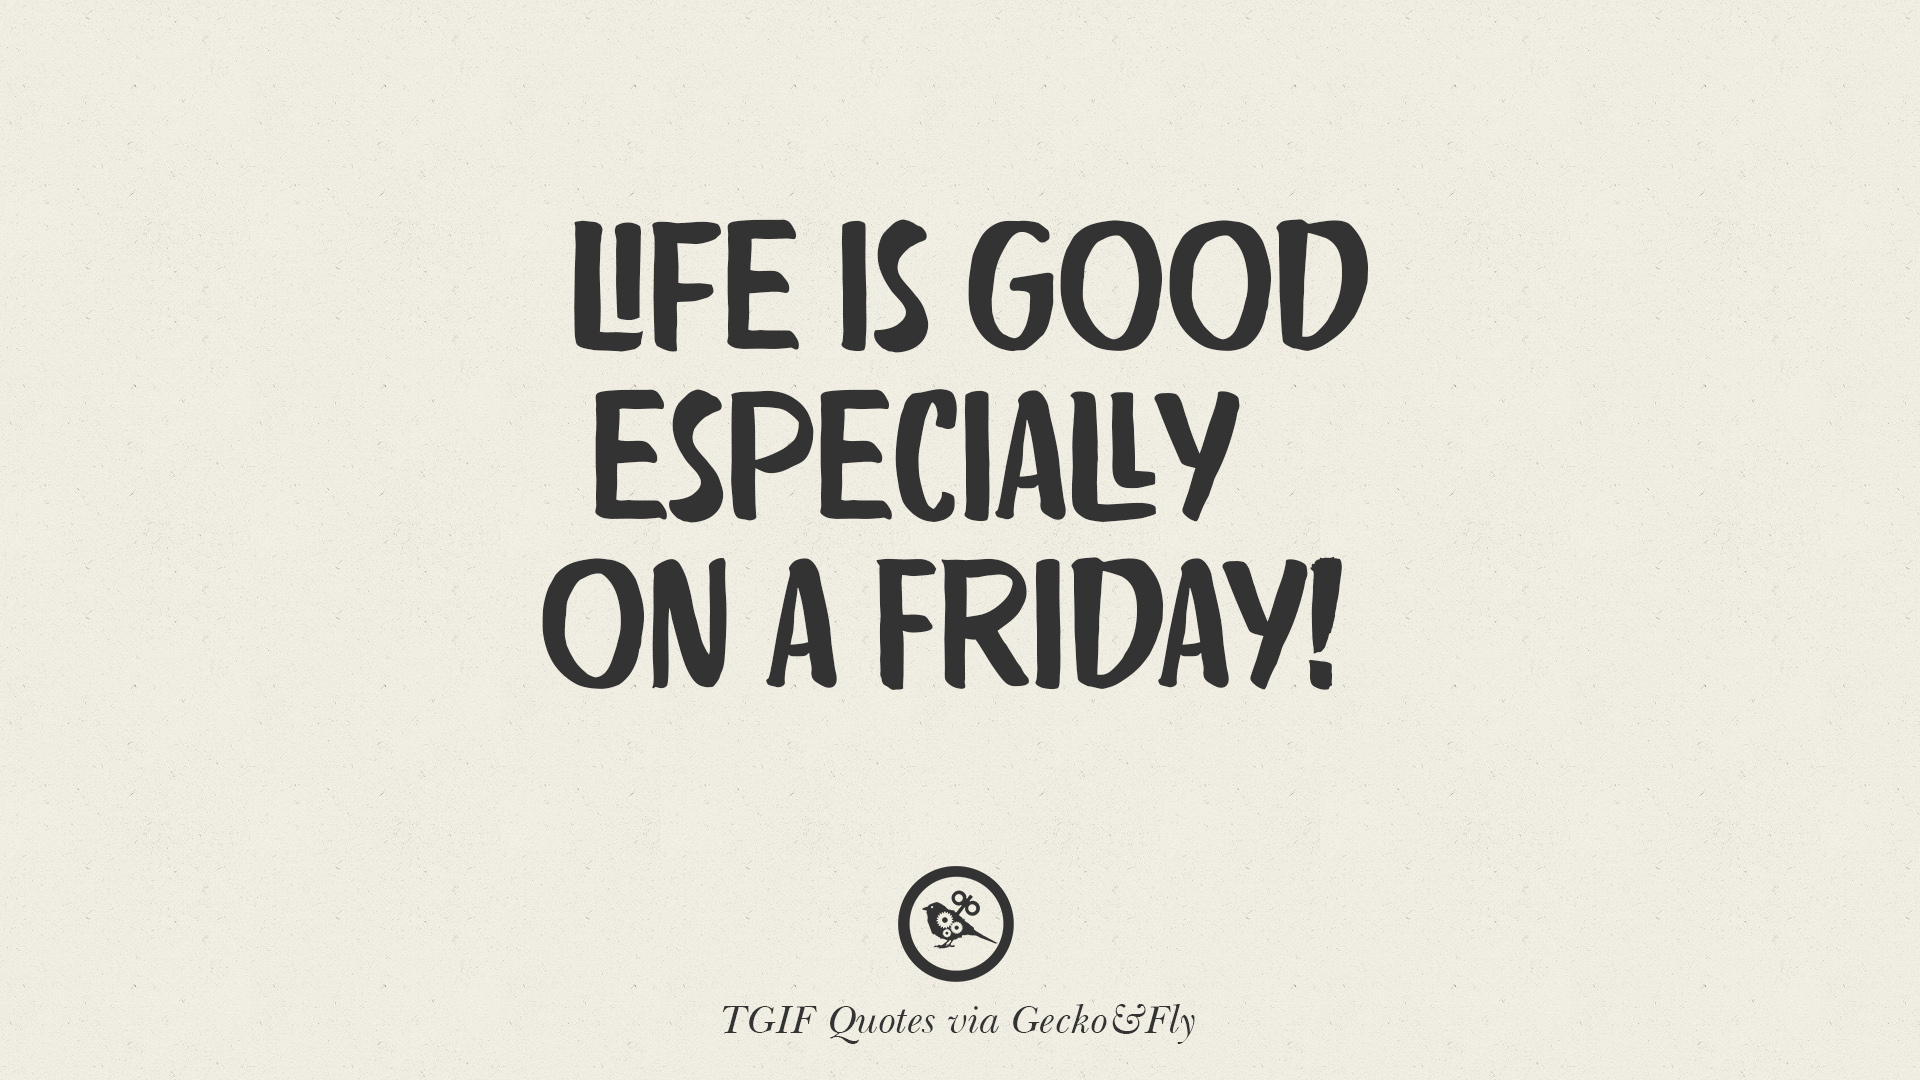 Life is good especially on a Friday TGIF Sarcastic Quotes And Meme For Your Boss